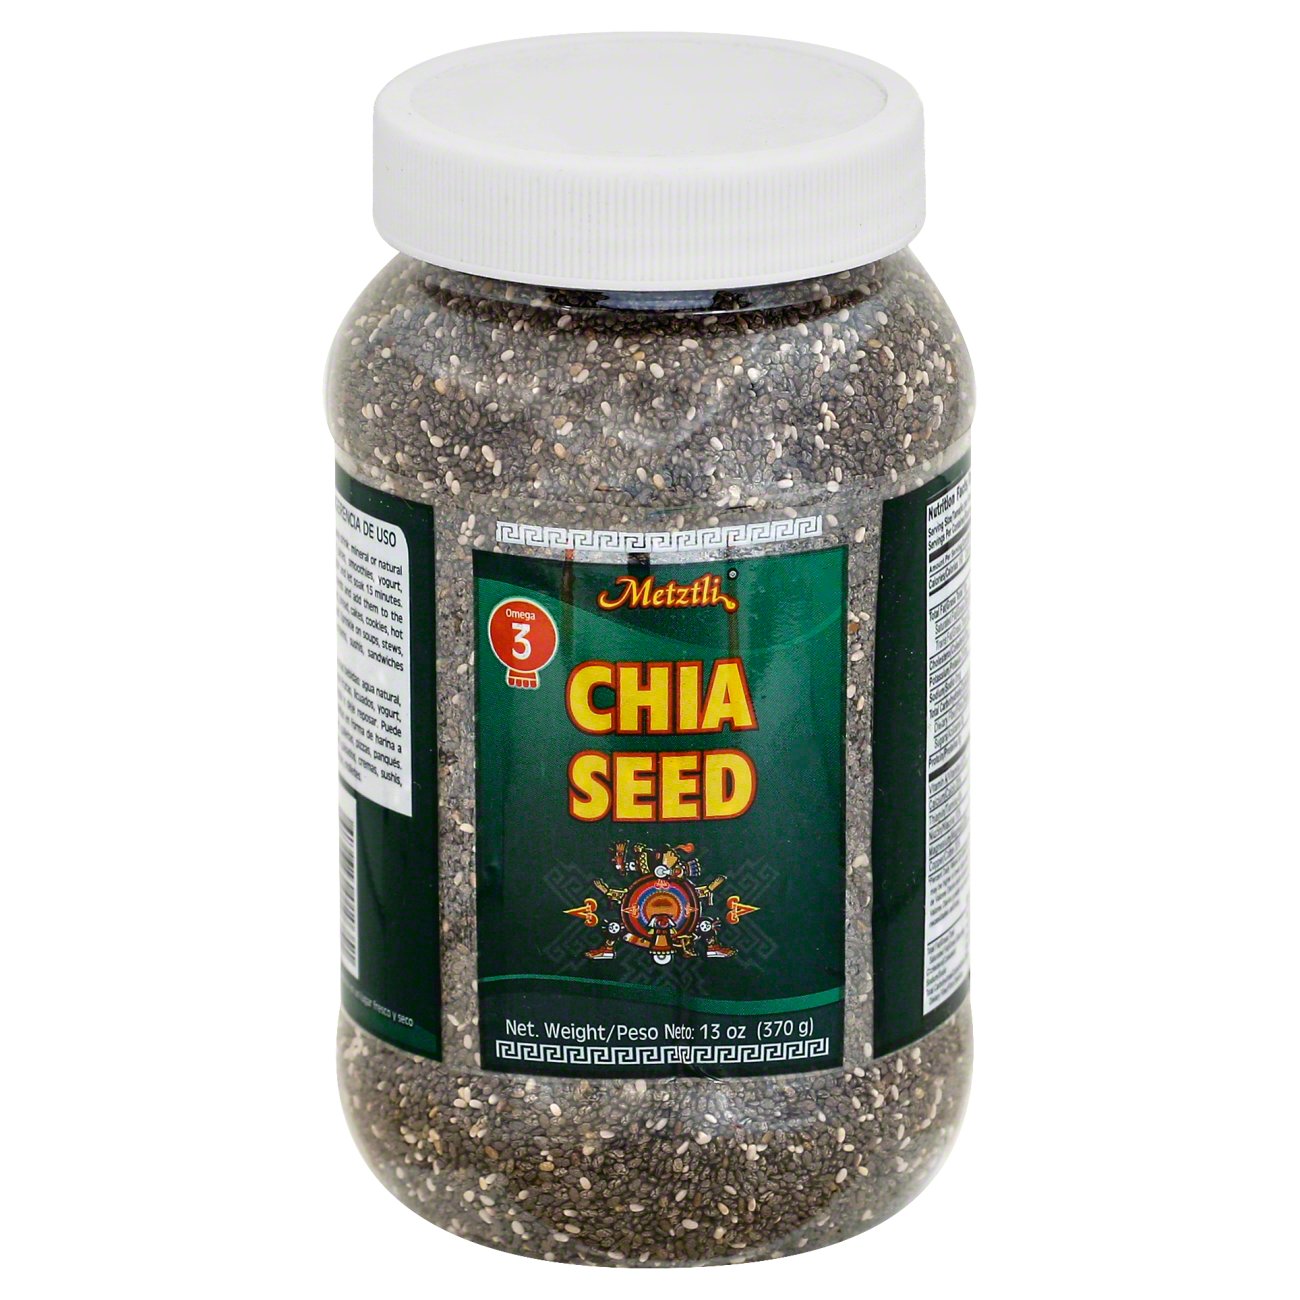 Metztli Chia Seeds - Shop Diet & Fitness at H-E-B